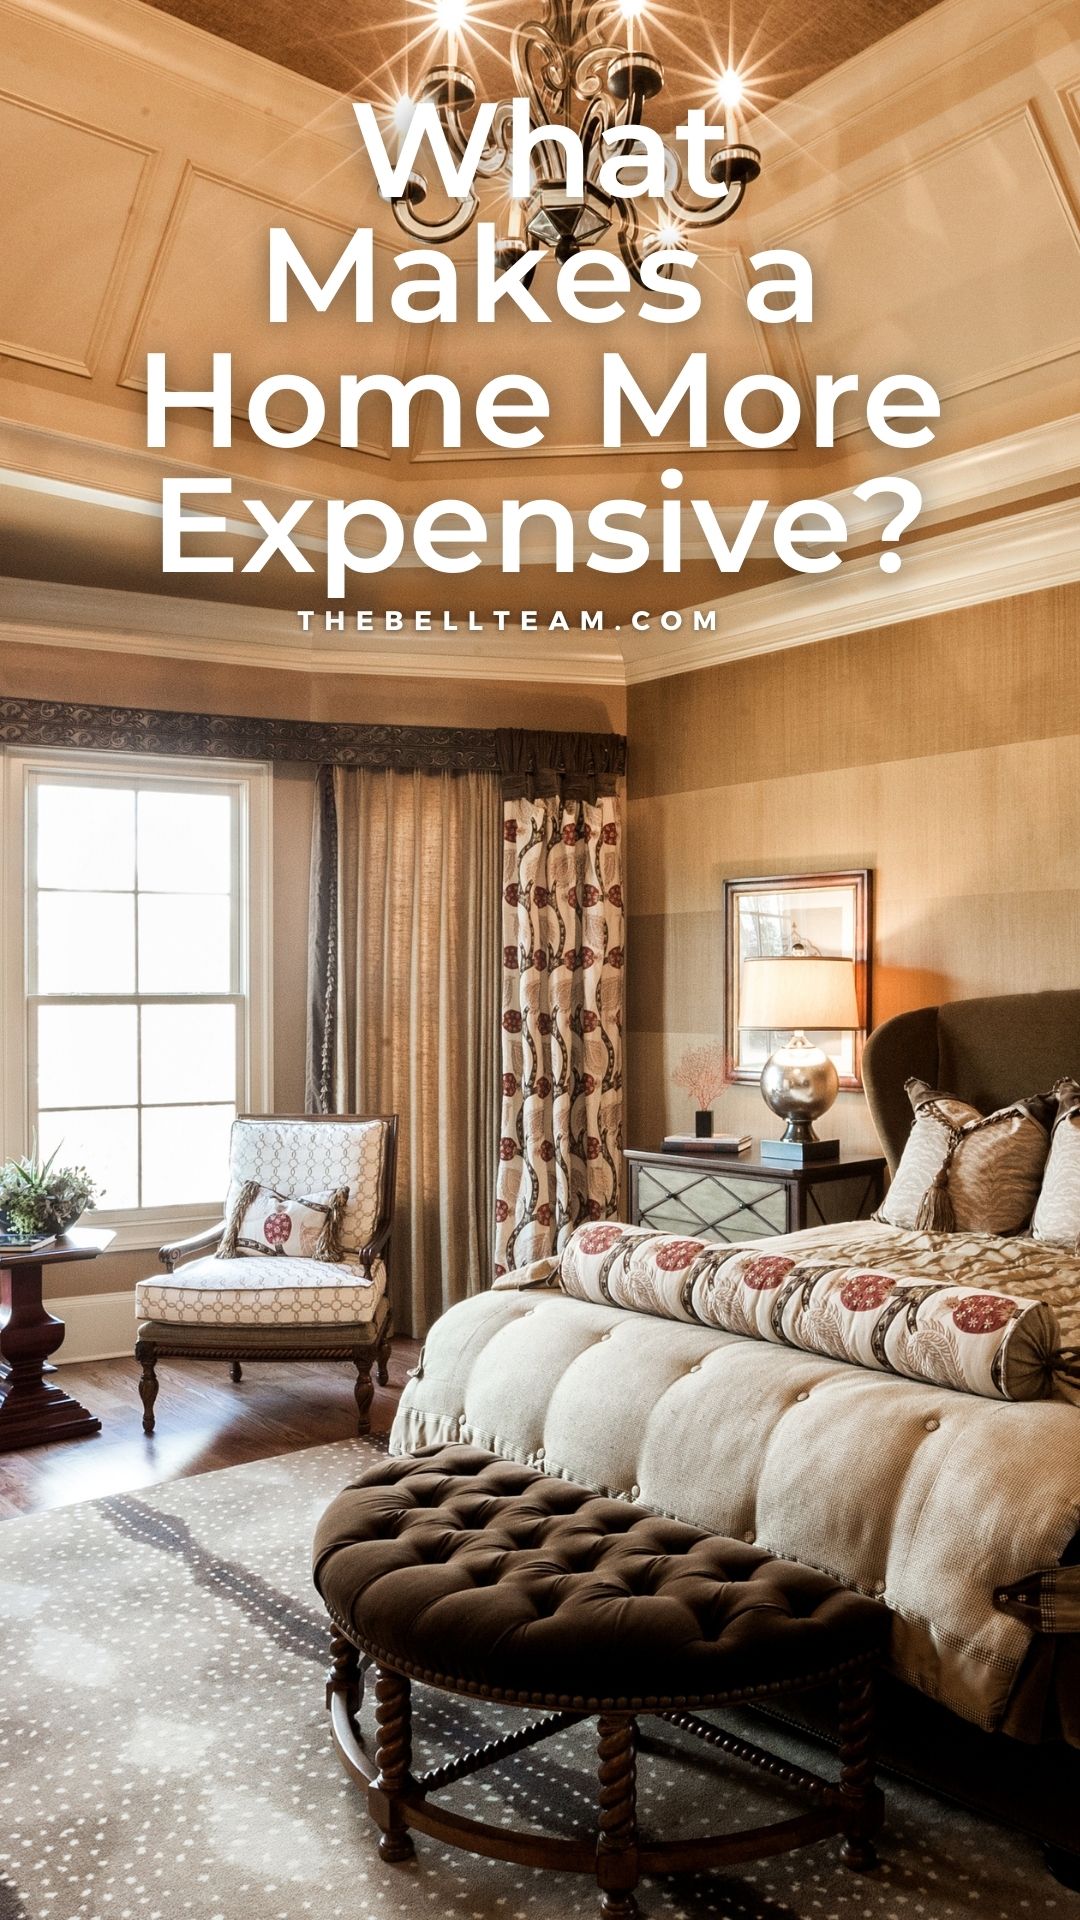 What Makes a Home More Expensive